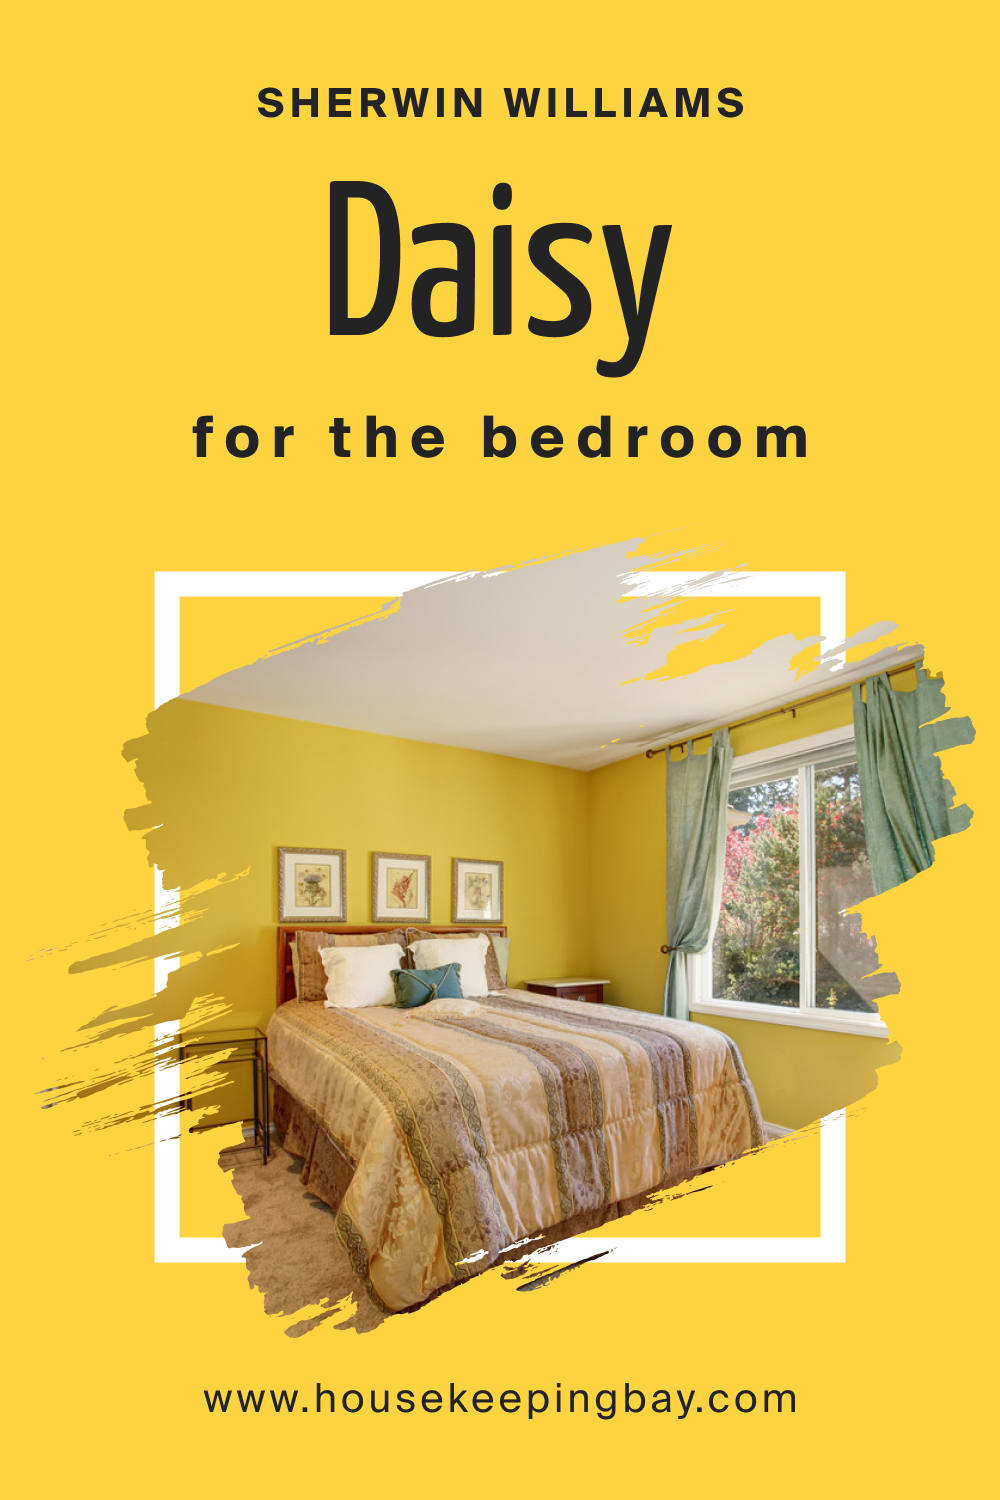 Sherwin Williams. Daisy SW 6910 For the bedroom